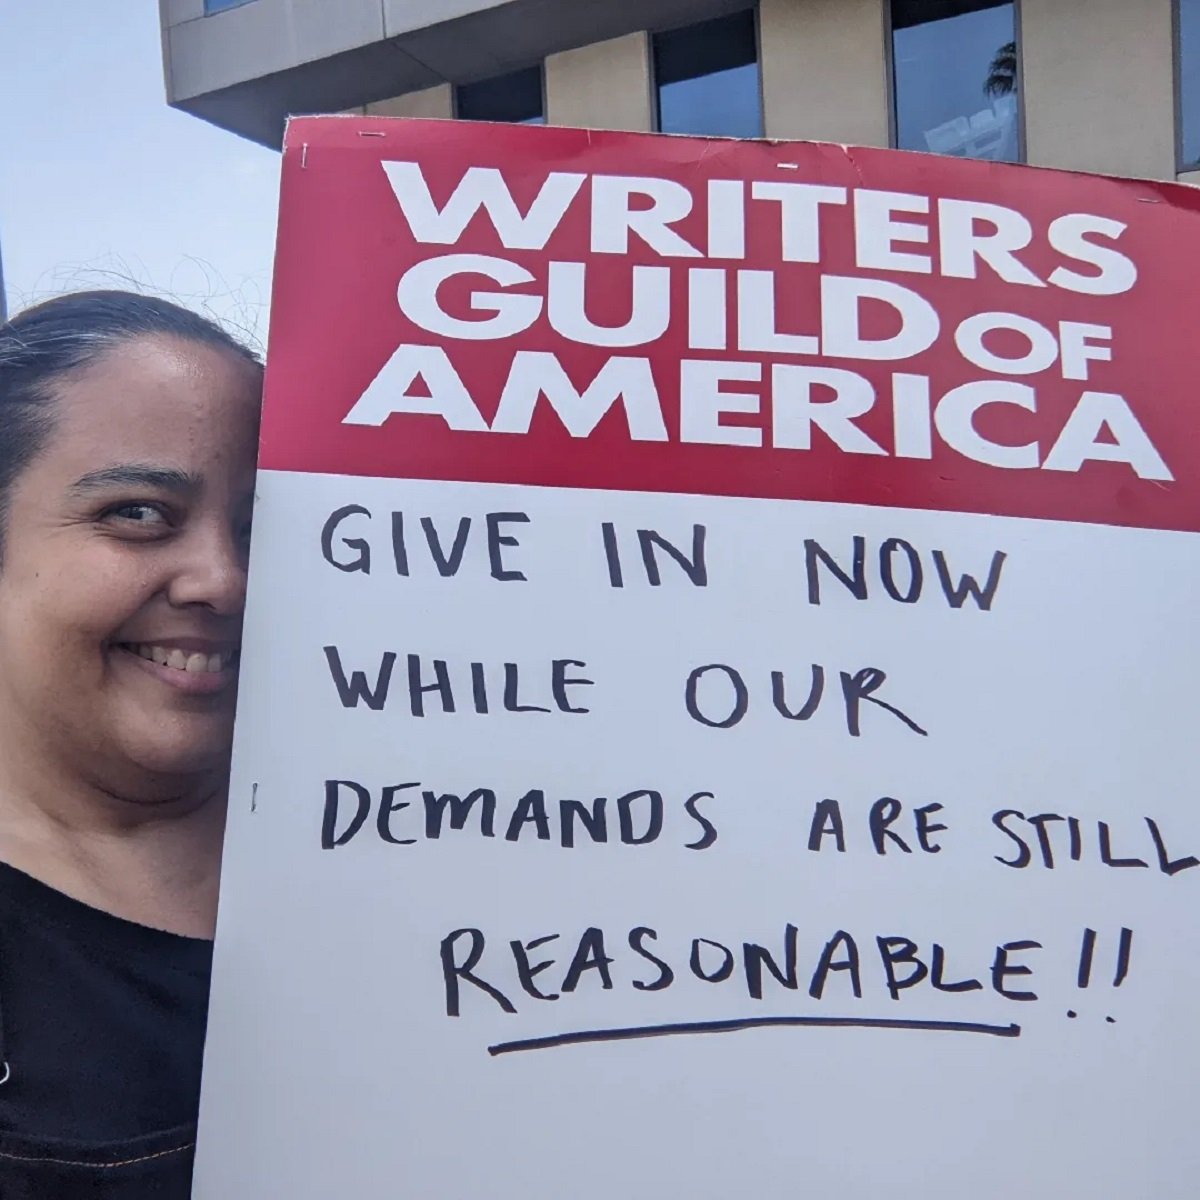 Square image of Teresa Jusino (a brown Latina with long, black hair in a ponytail) holding a picket sign that reads "Writers Guild of America" on top, and then "Give in now while our demands are still REASONABLE!" handwritten on the bottom.